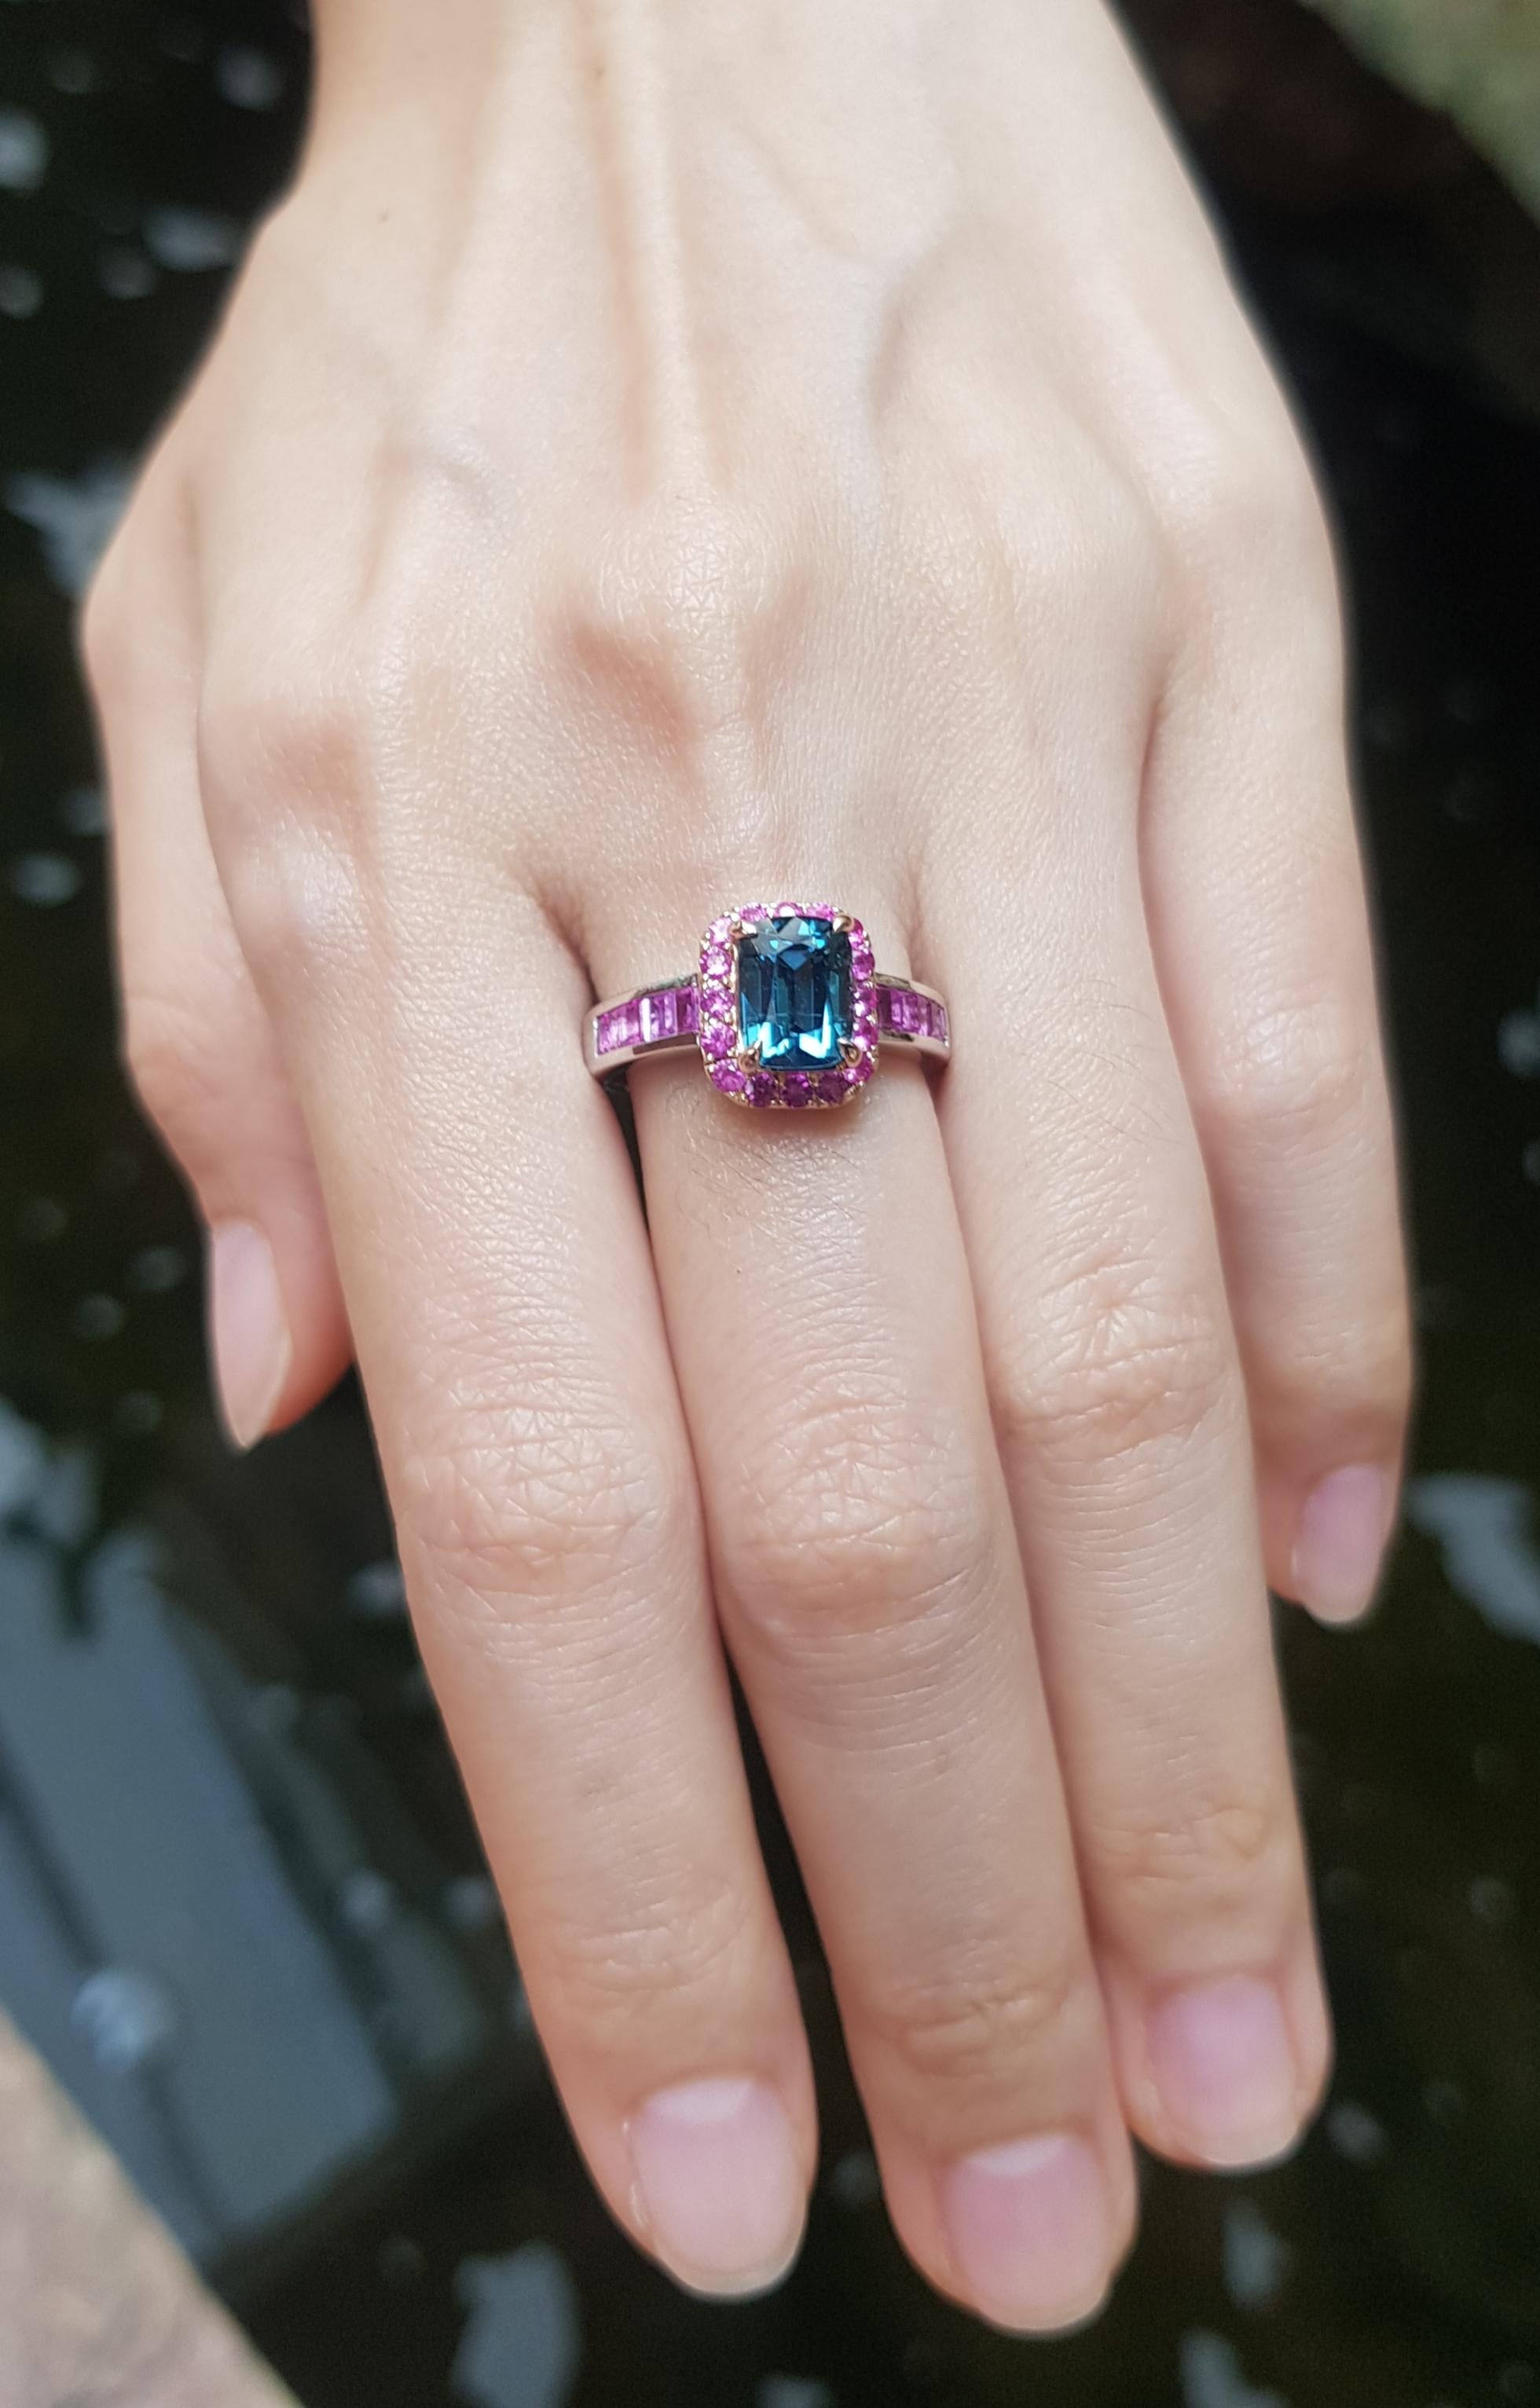 Blue Tourmaline 1.90 carats with Pink Sapphire 1.12 carats Ring set in 18K White Gold Settings

Width:  1.0 cm 
Length: 1.1 cm
Ring Size: 55
Total Weight: 6.87 grams

